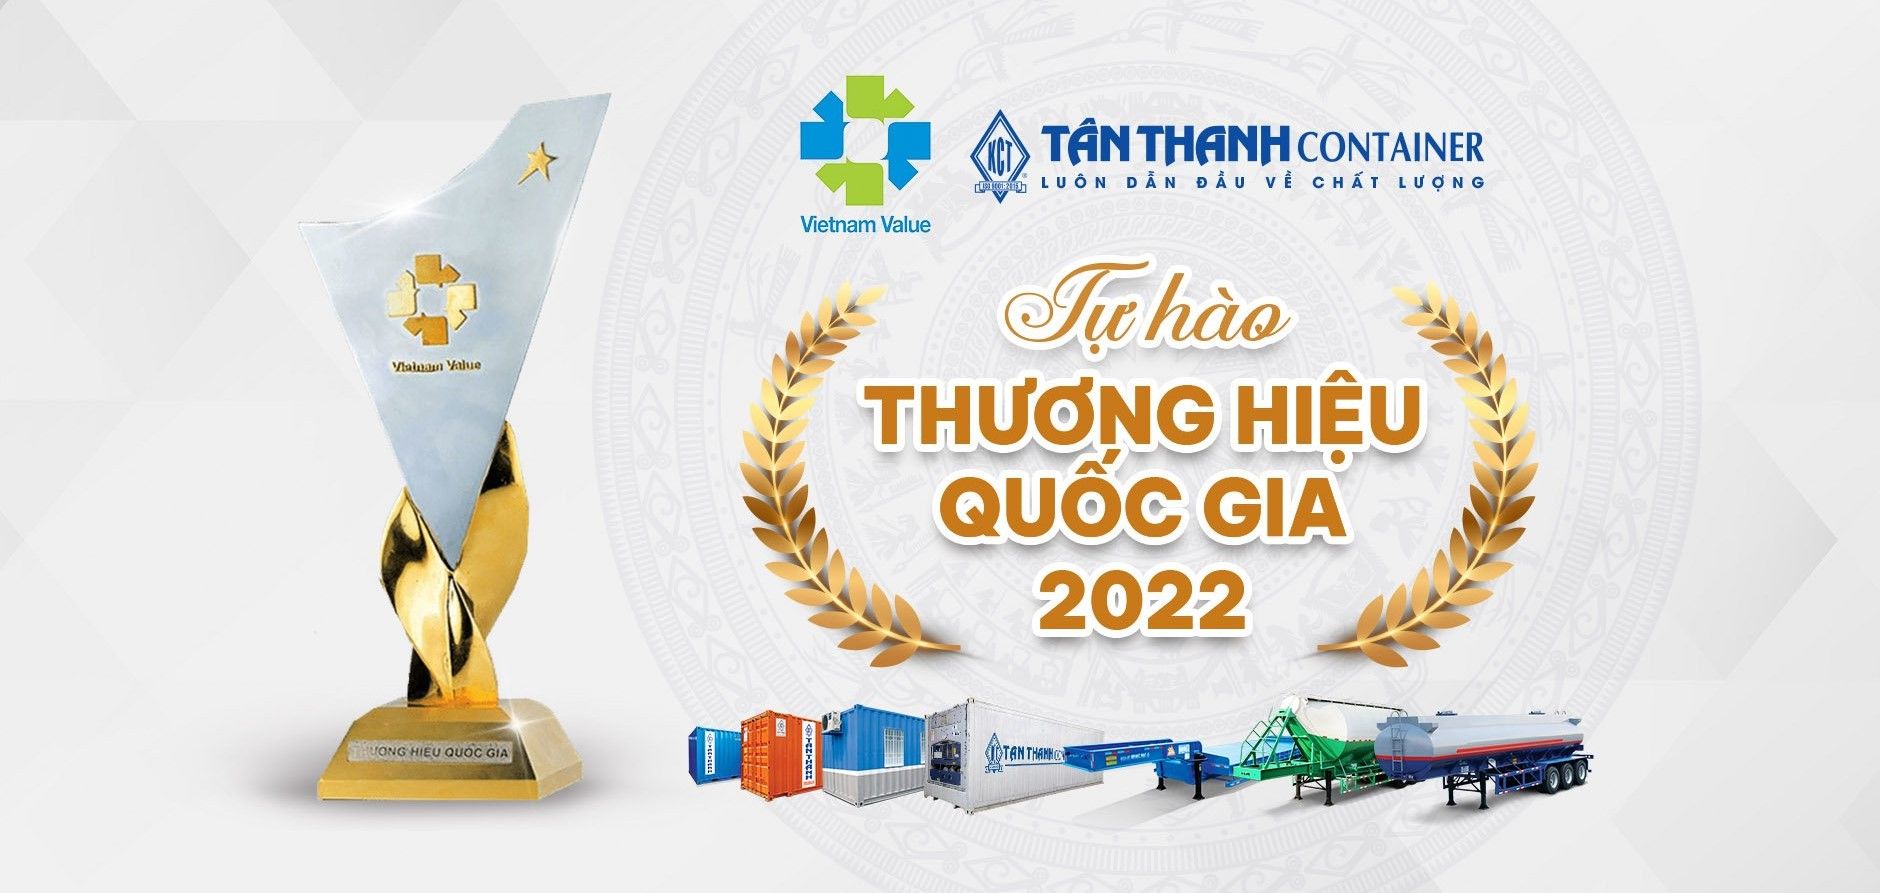 tân thanh container